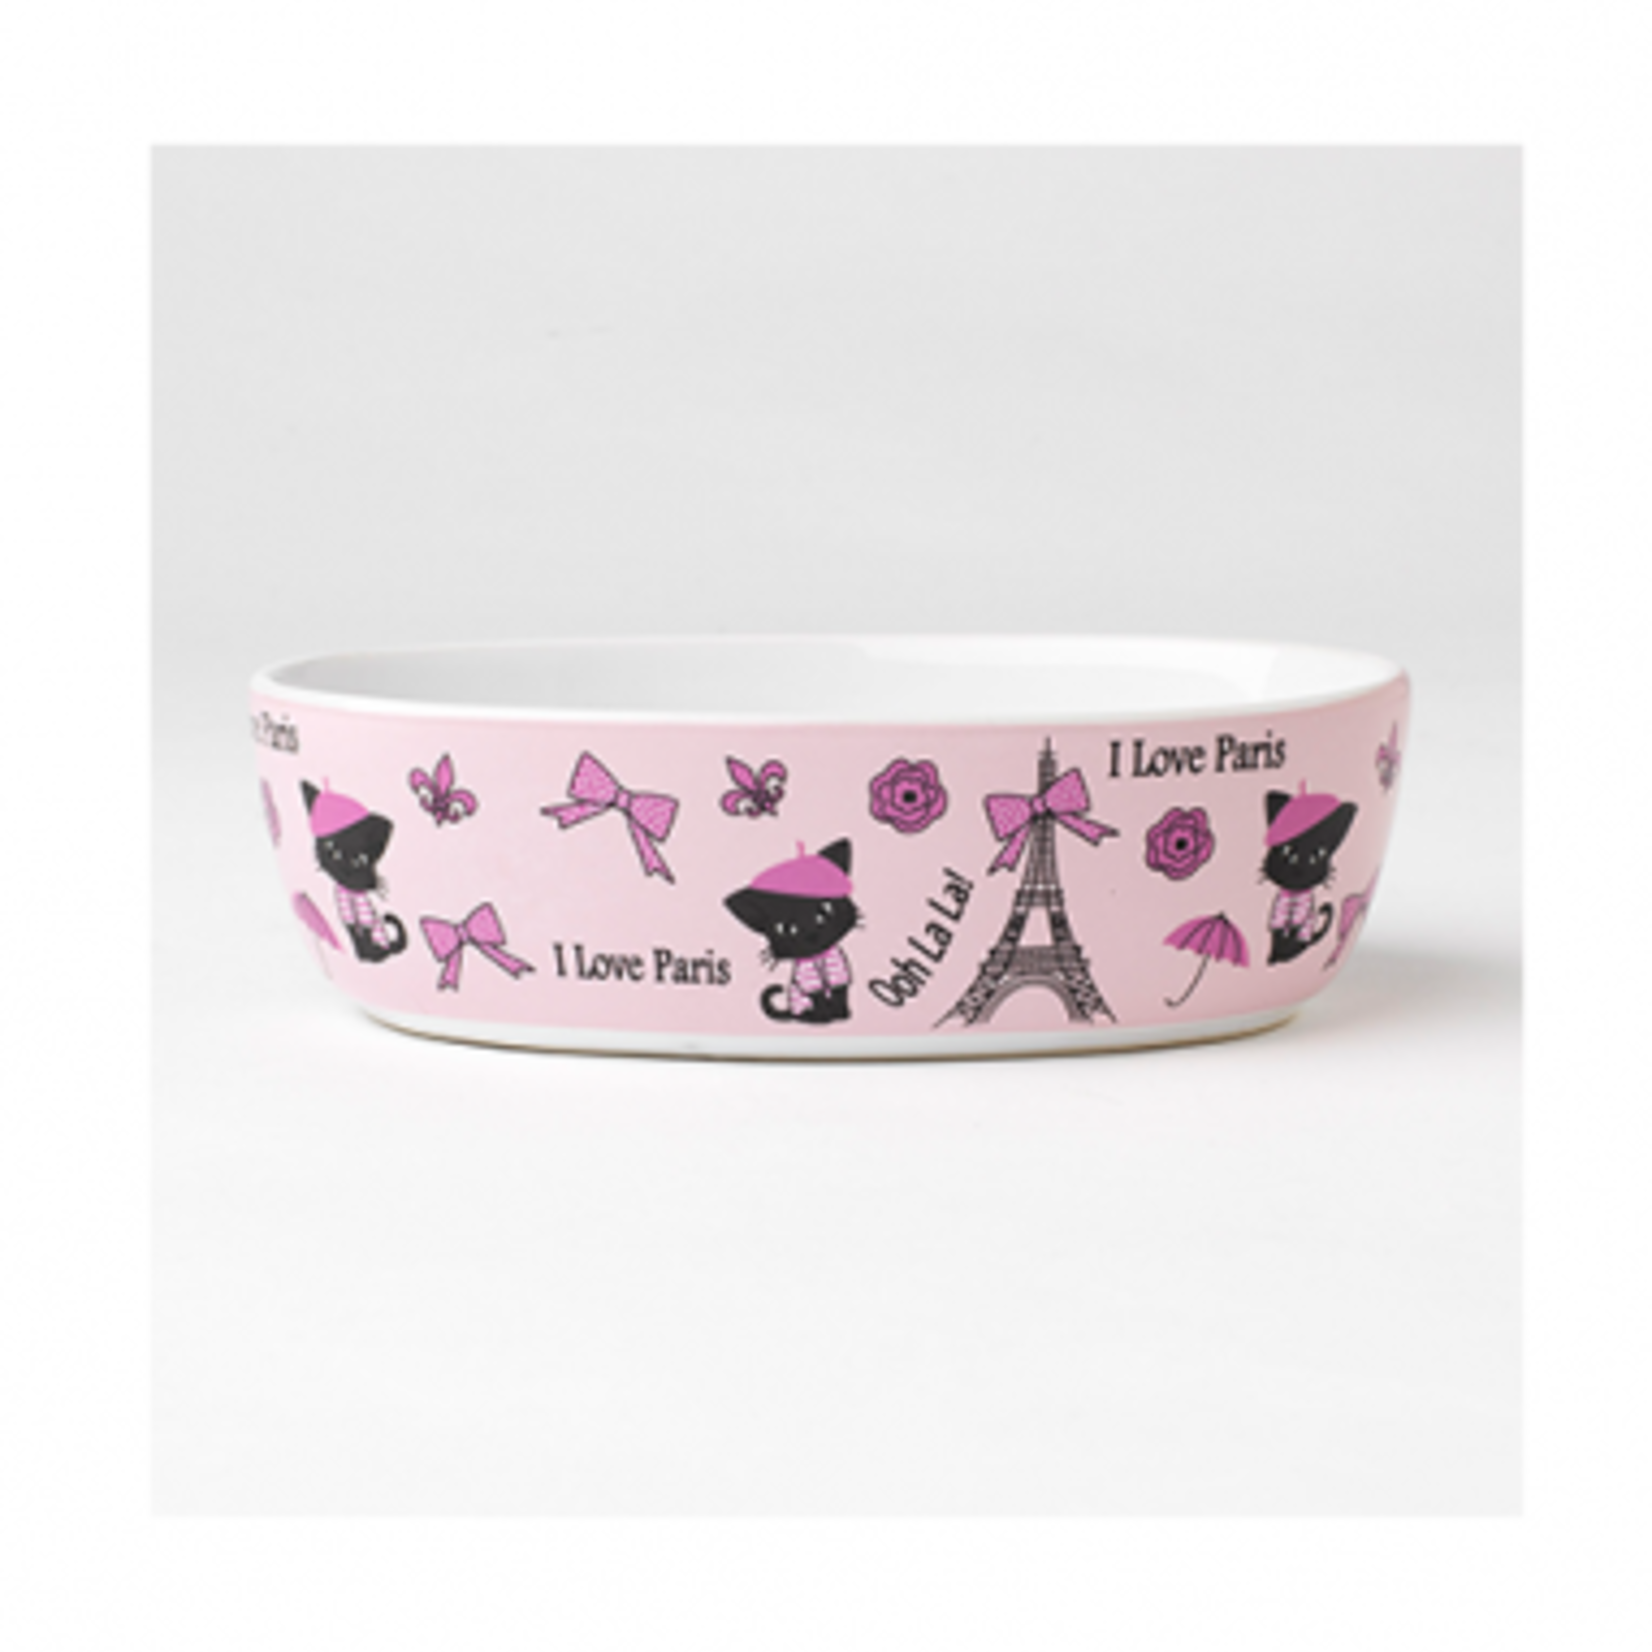 Petrageous 1 Oval Bowl - I love Paris - Pink - 7 in (2 cups)